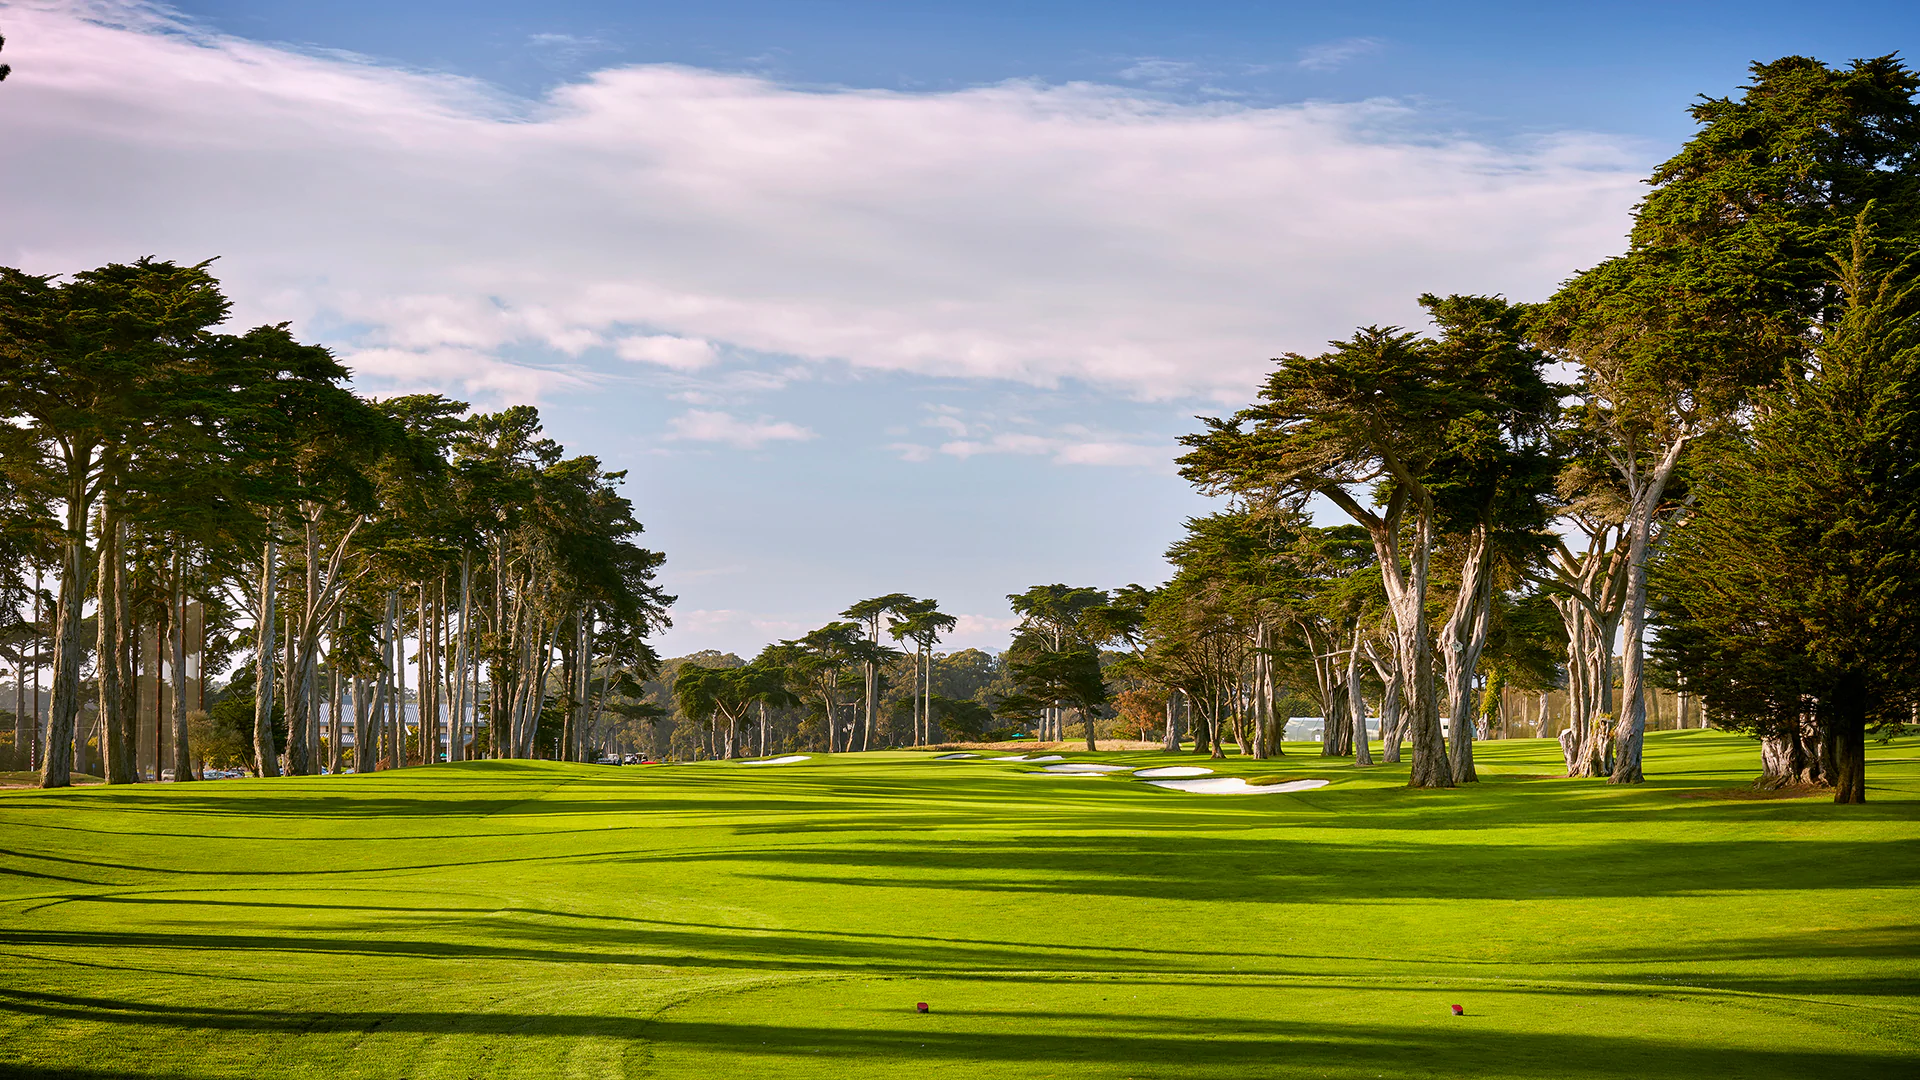 On what would’ve been PGA Championship week, hope remains at TPC Harding Park